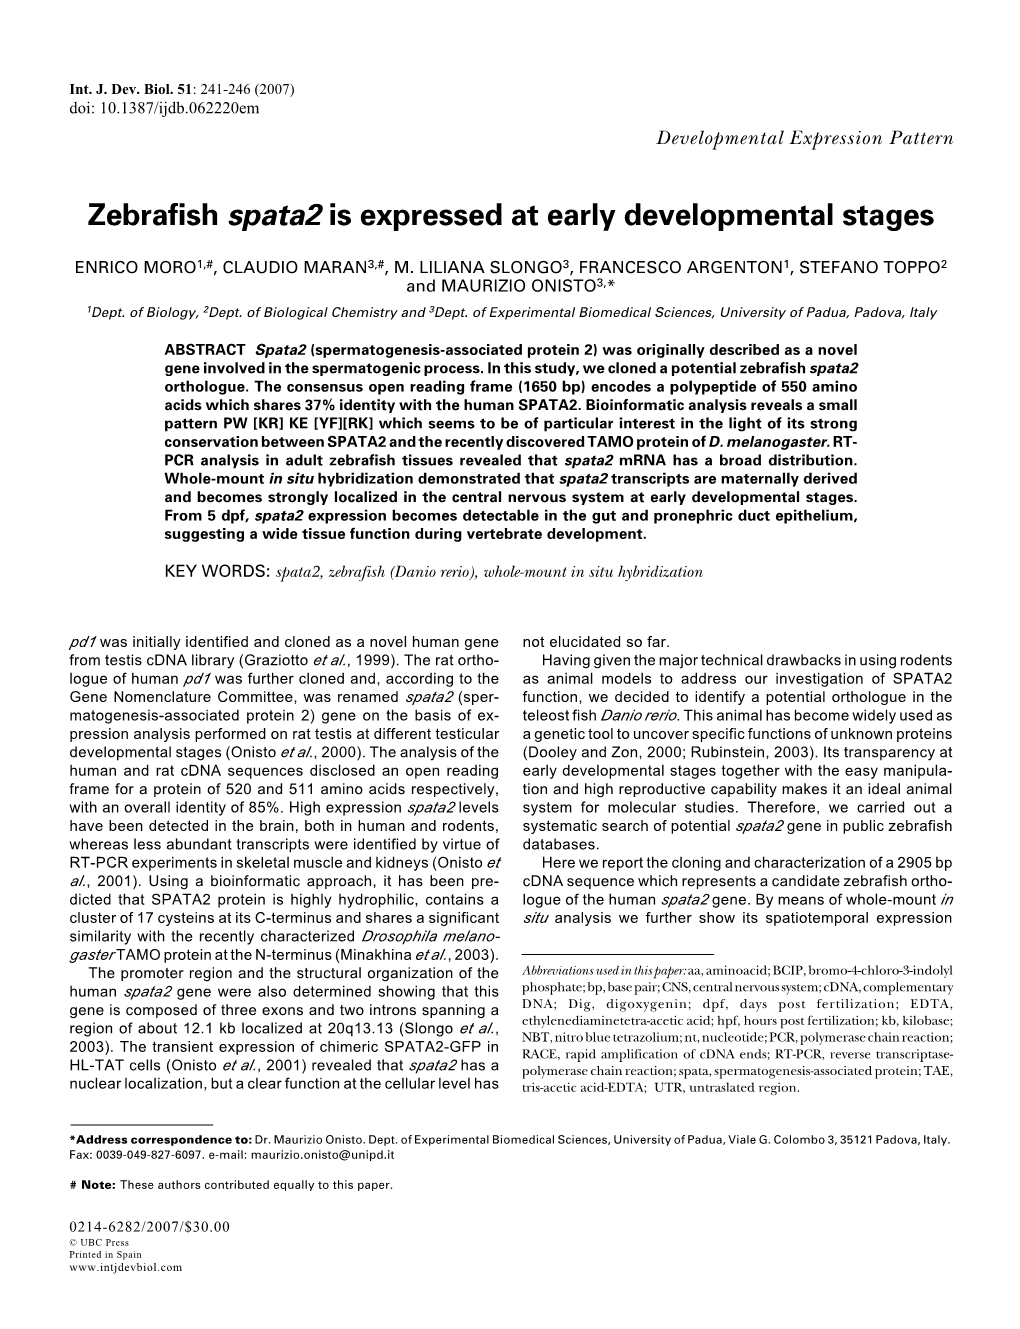 Zebrafish Spata2 Is Expressed at Early Developmental Stages